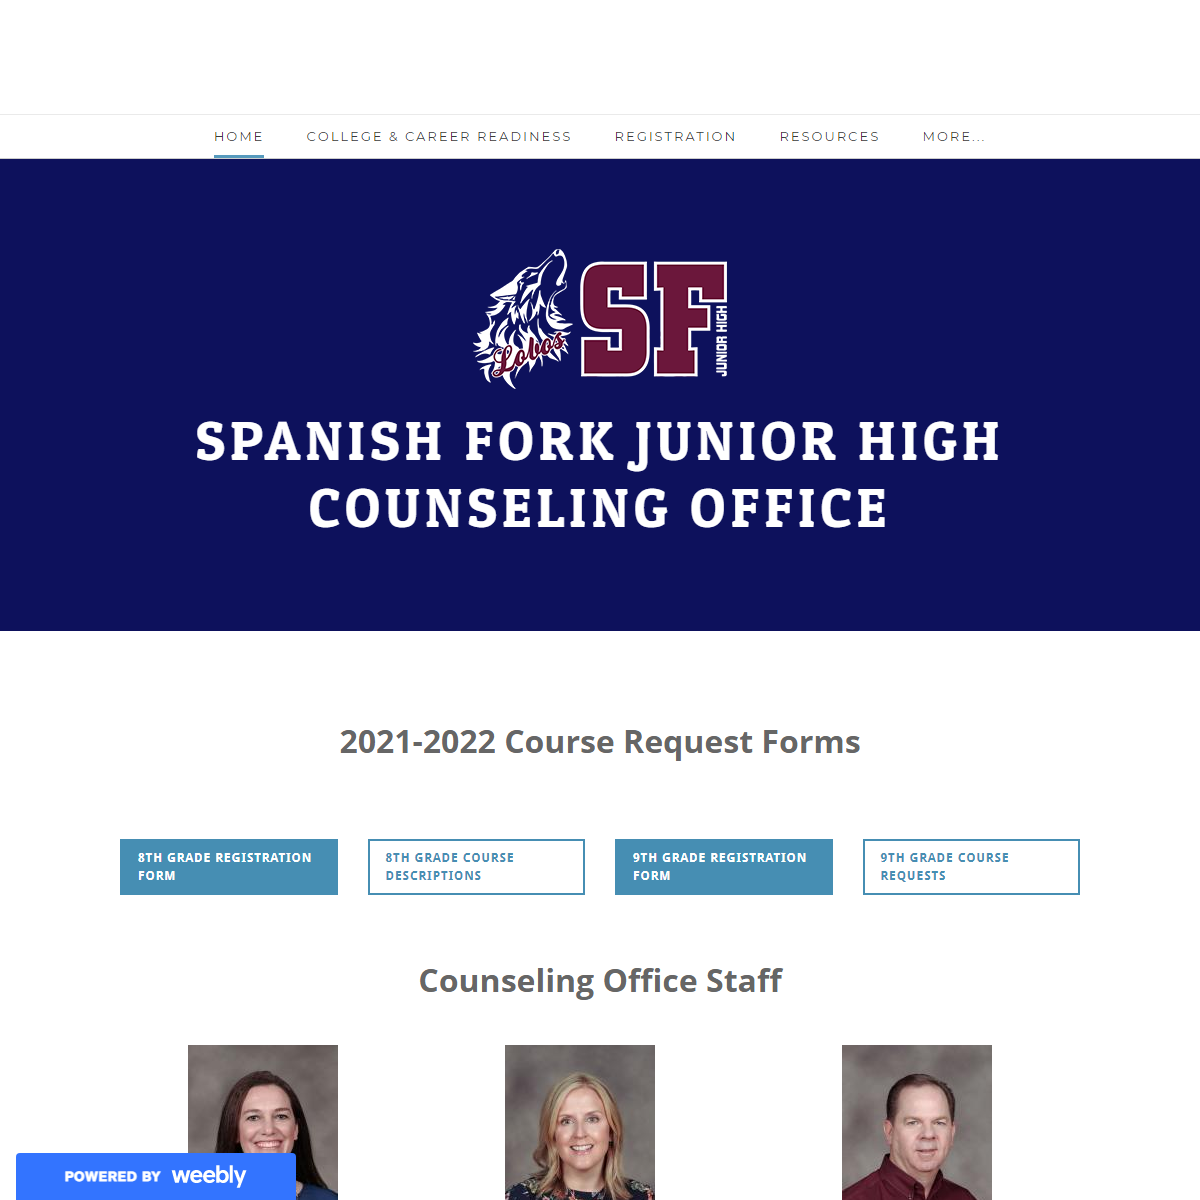 A complete backup of http://sfjhscounseling.weebly.com/